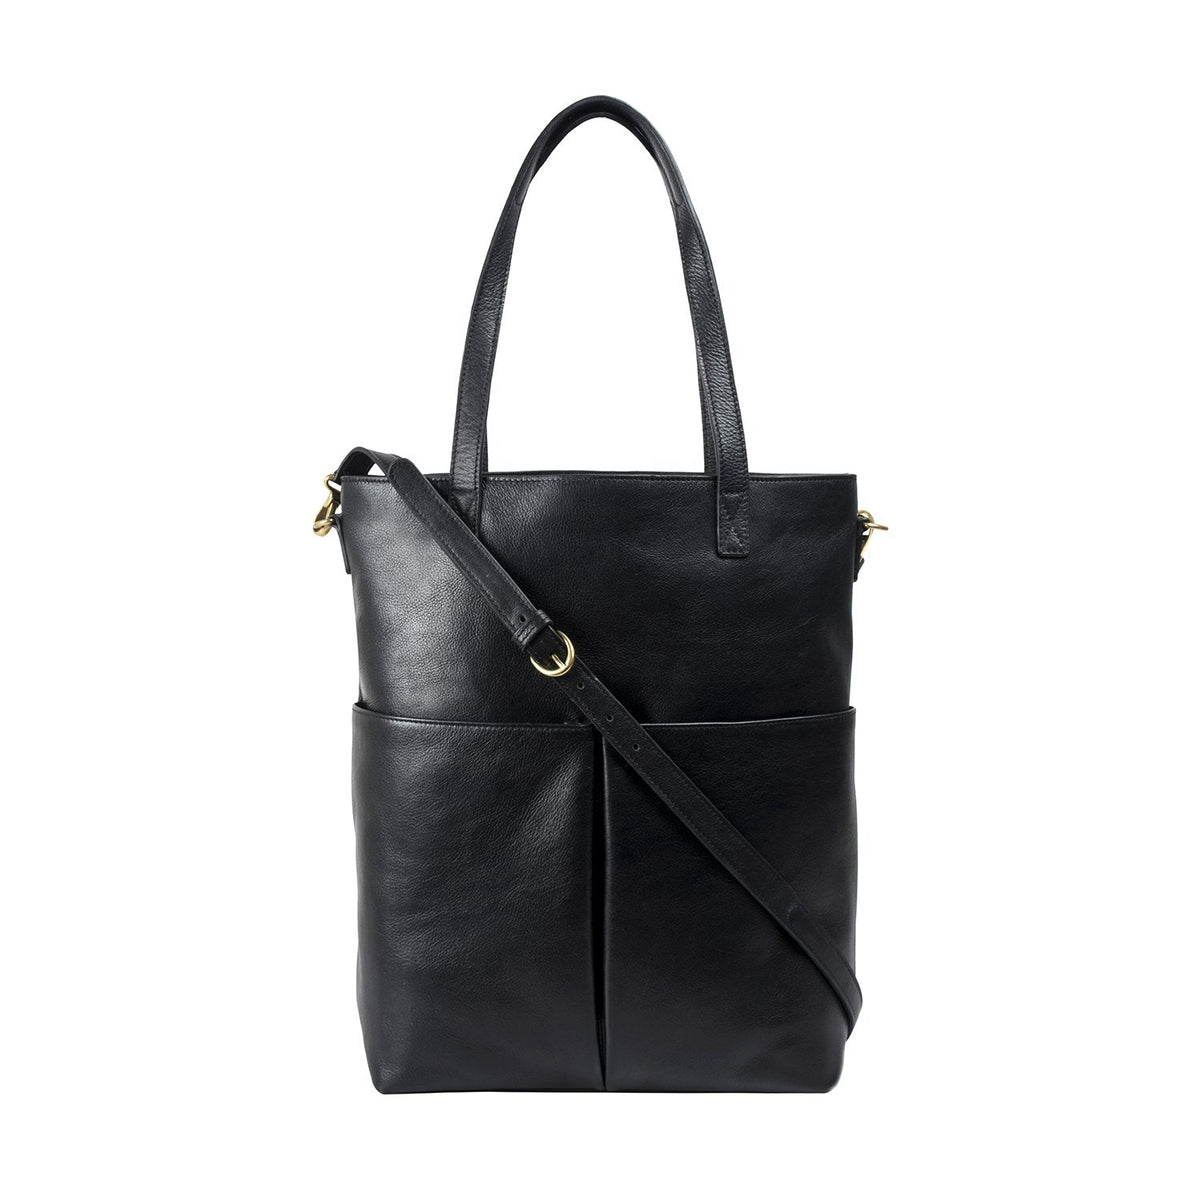 Bags &amp; Luggage - Women&#39;s Bags - Shoulder Bags Pepper Large Leather Tote With Sling Strap